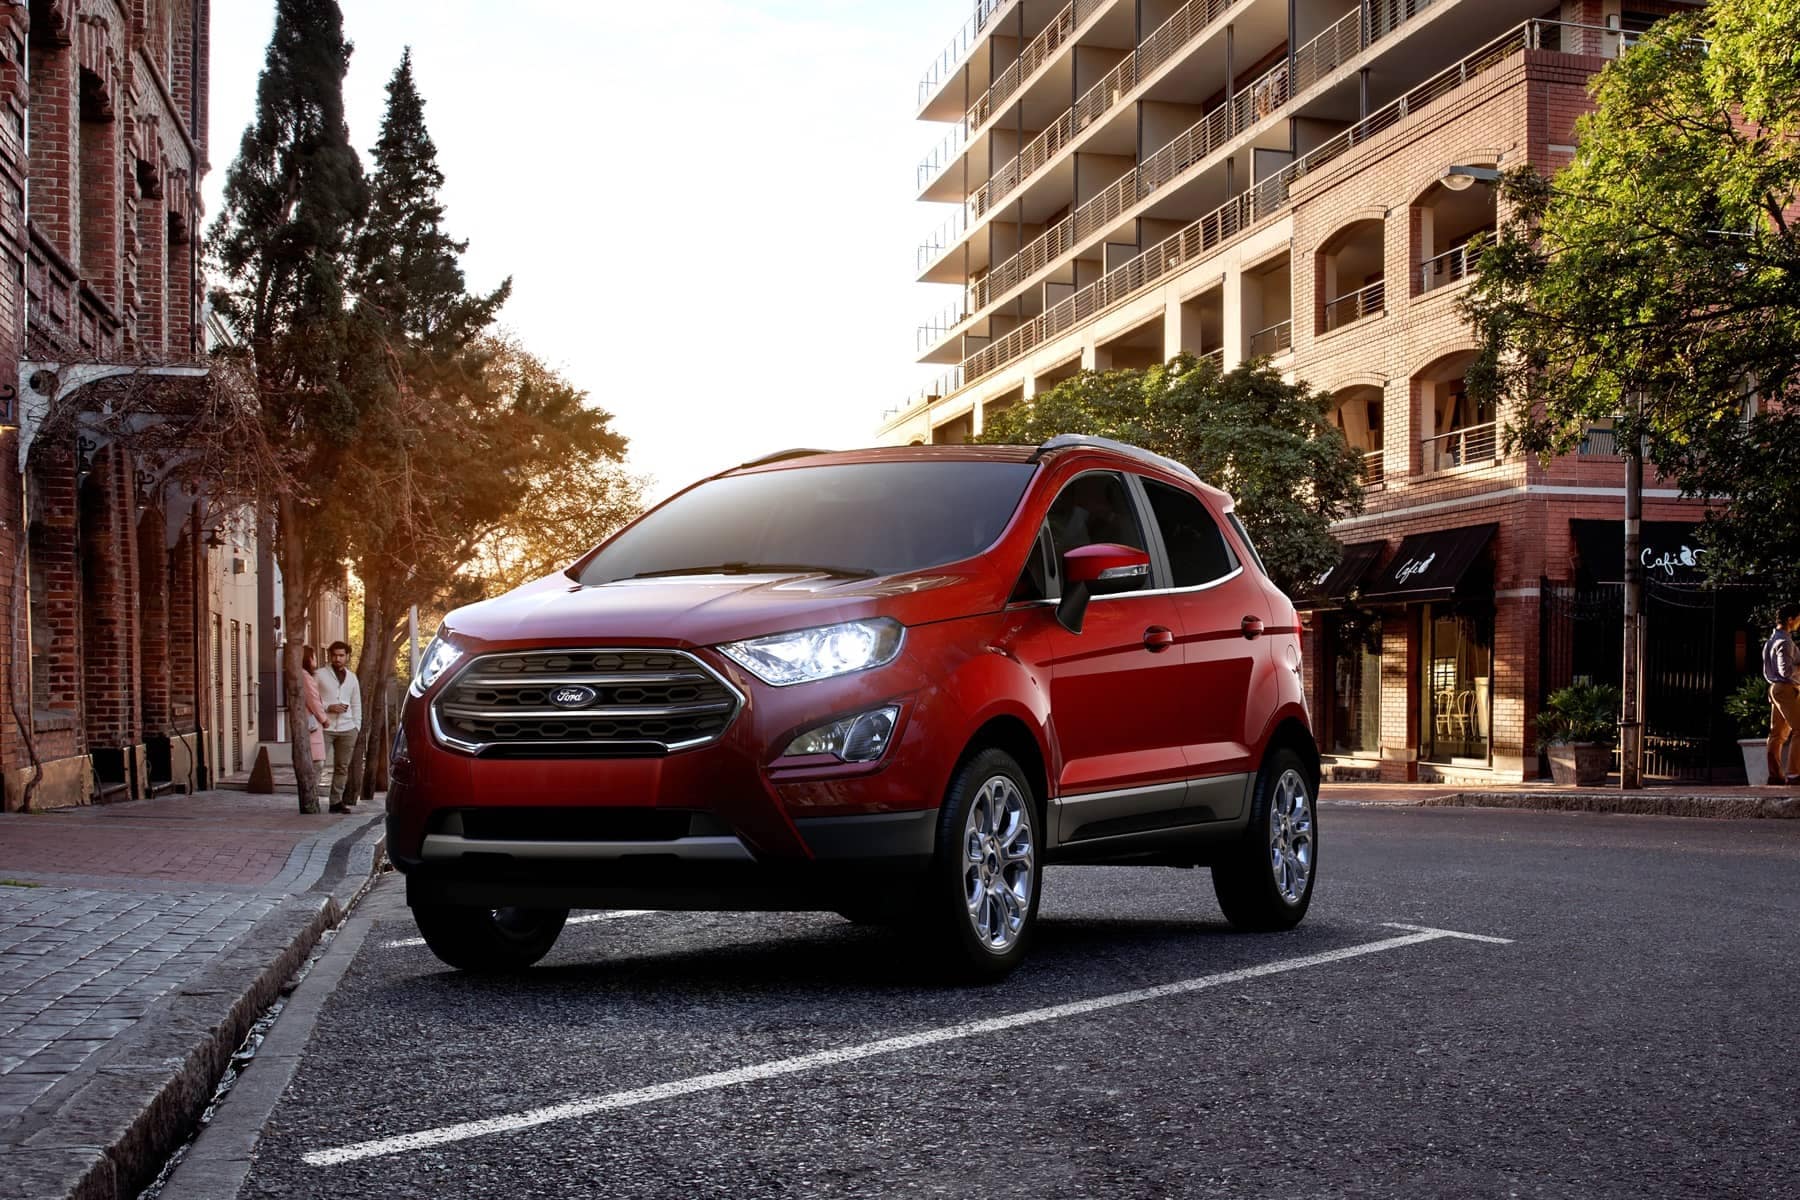 2021 Ford EcoSport in Ruby Red parking at spot near large buildings in city